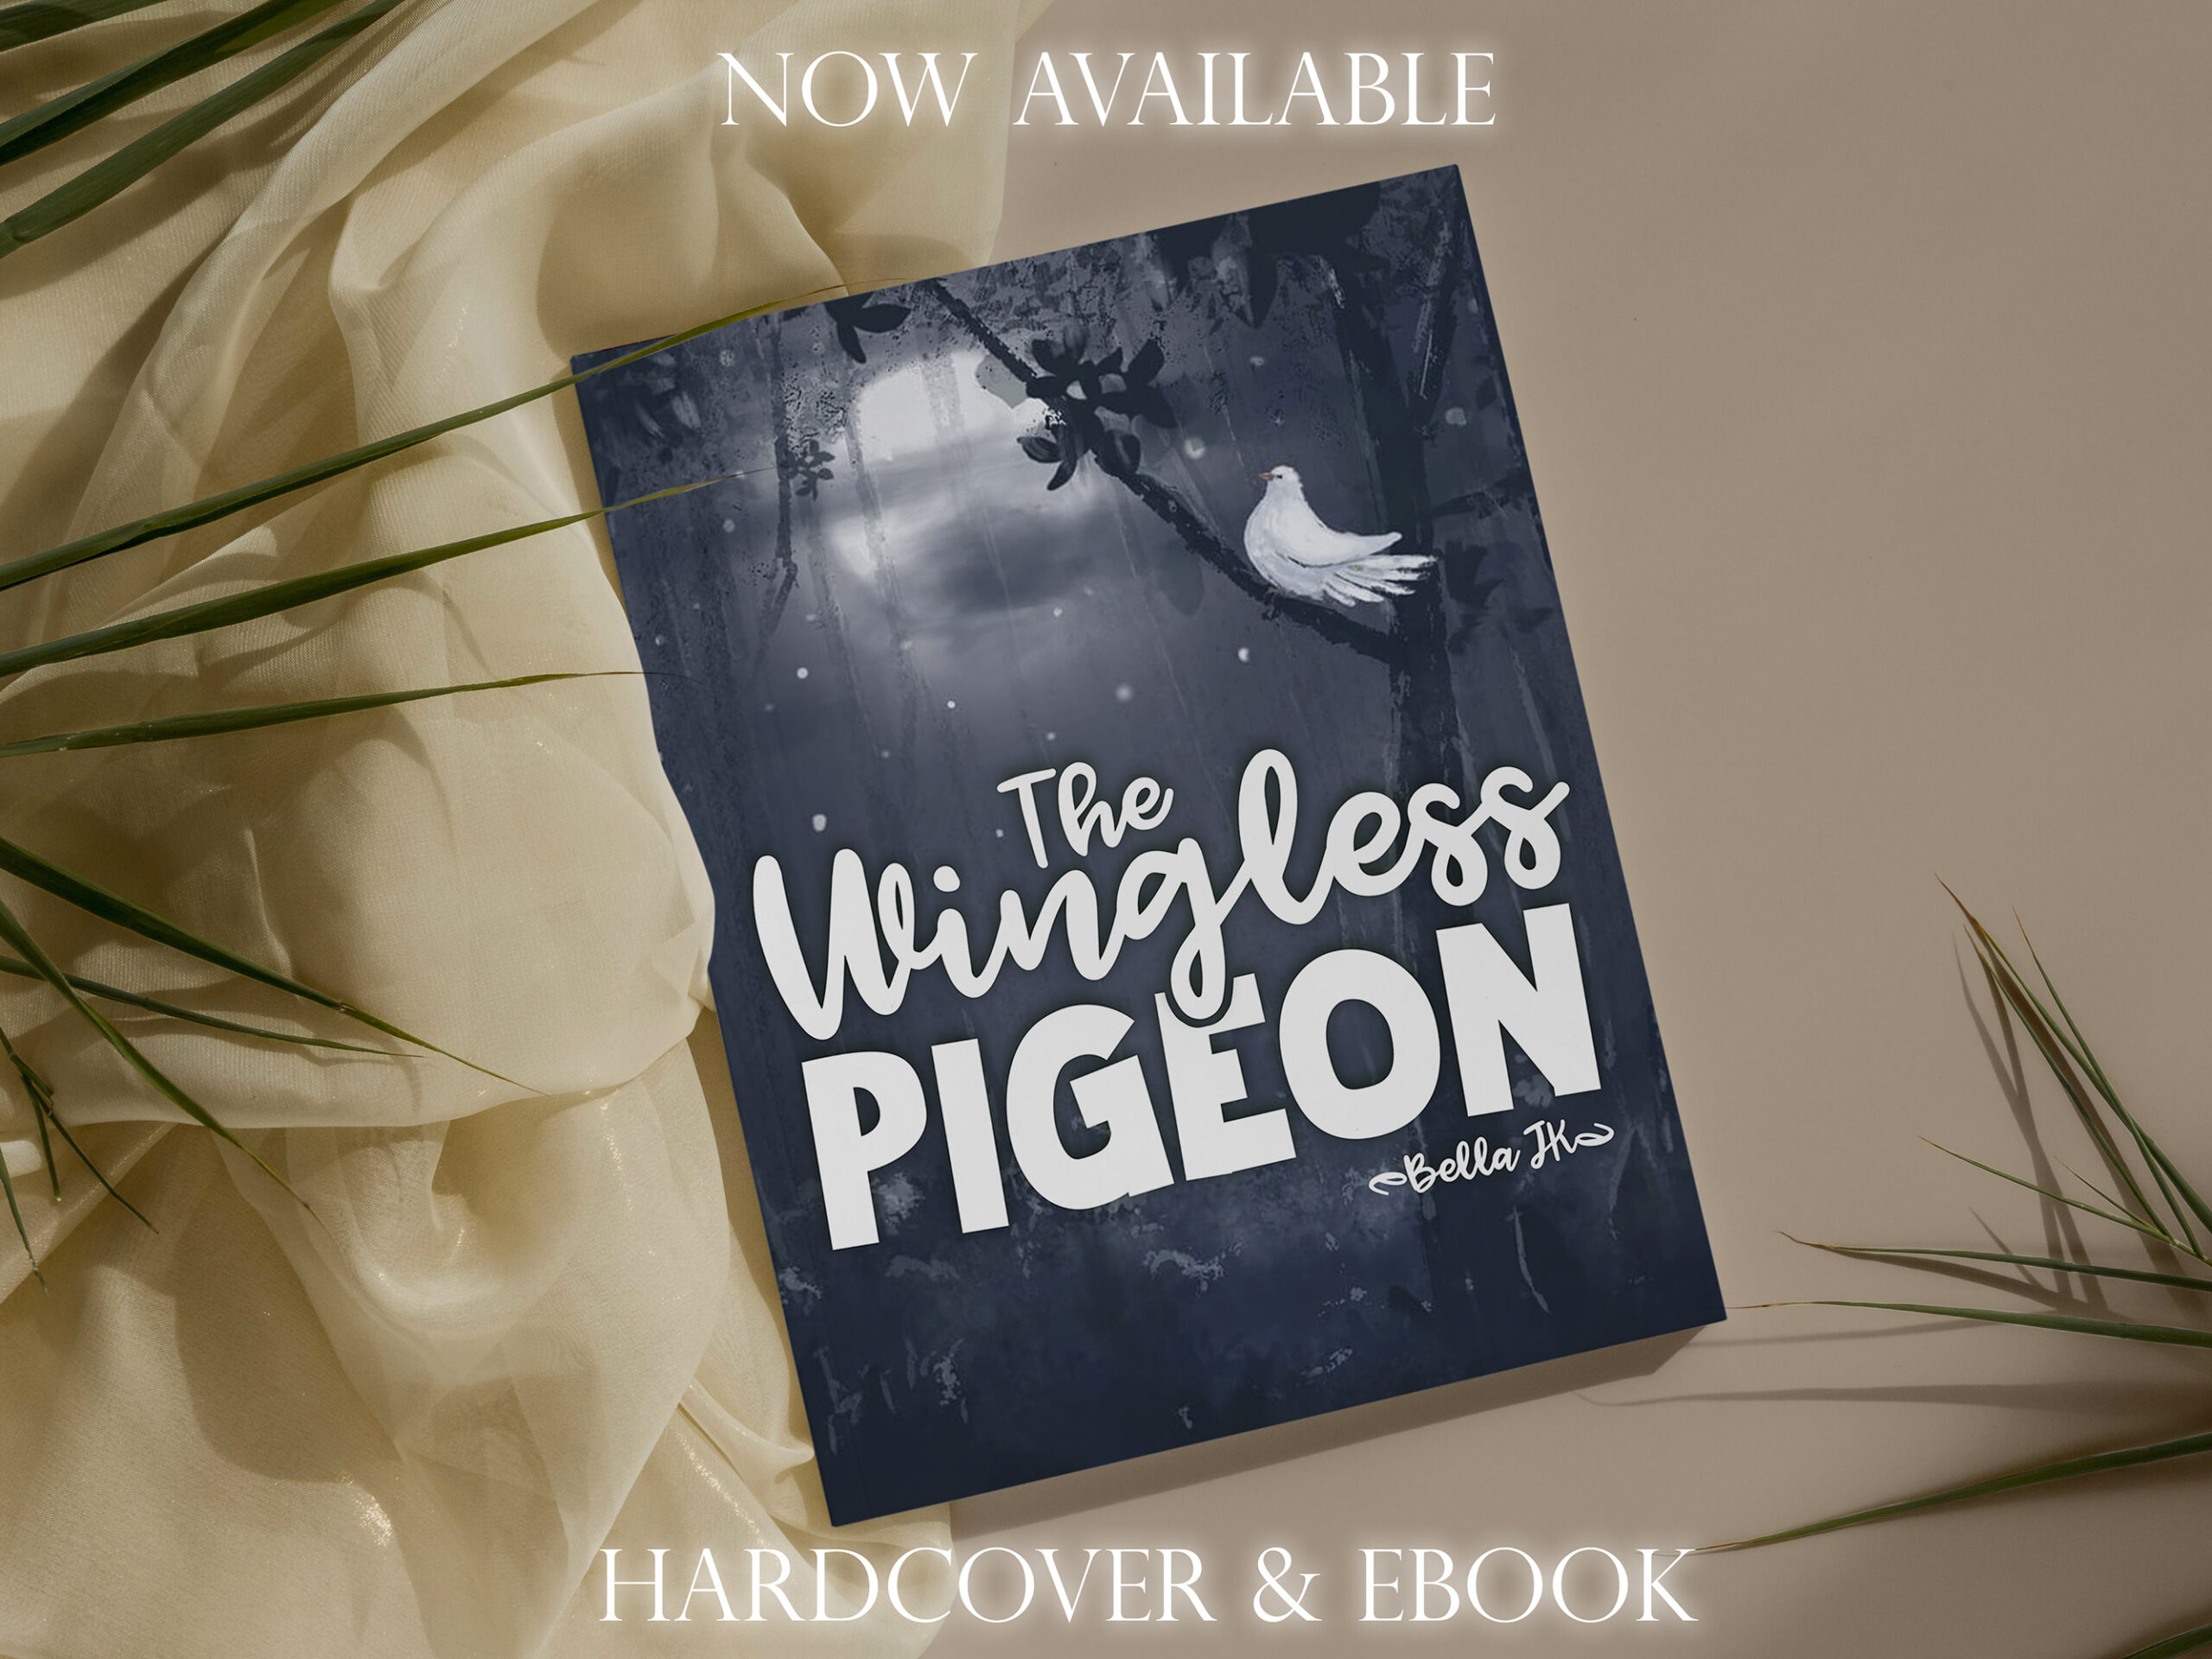 The Wingless Pigeon by Bella JK available now from Histria Books